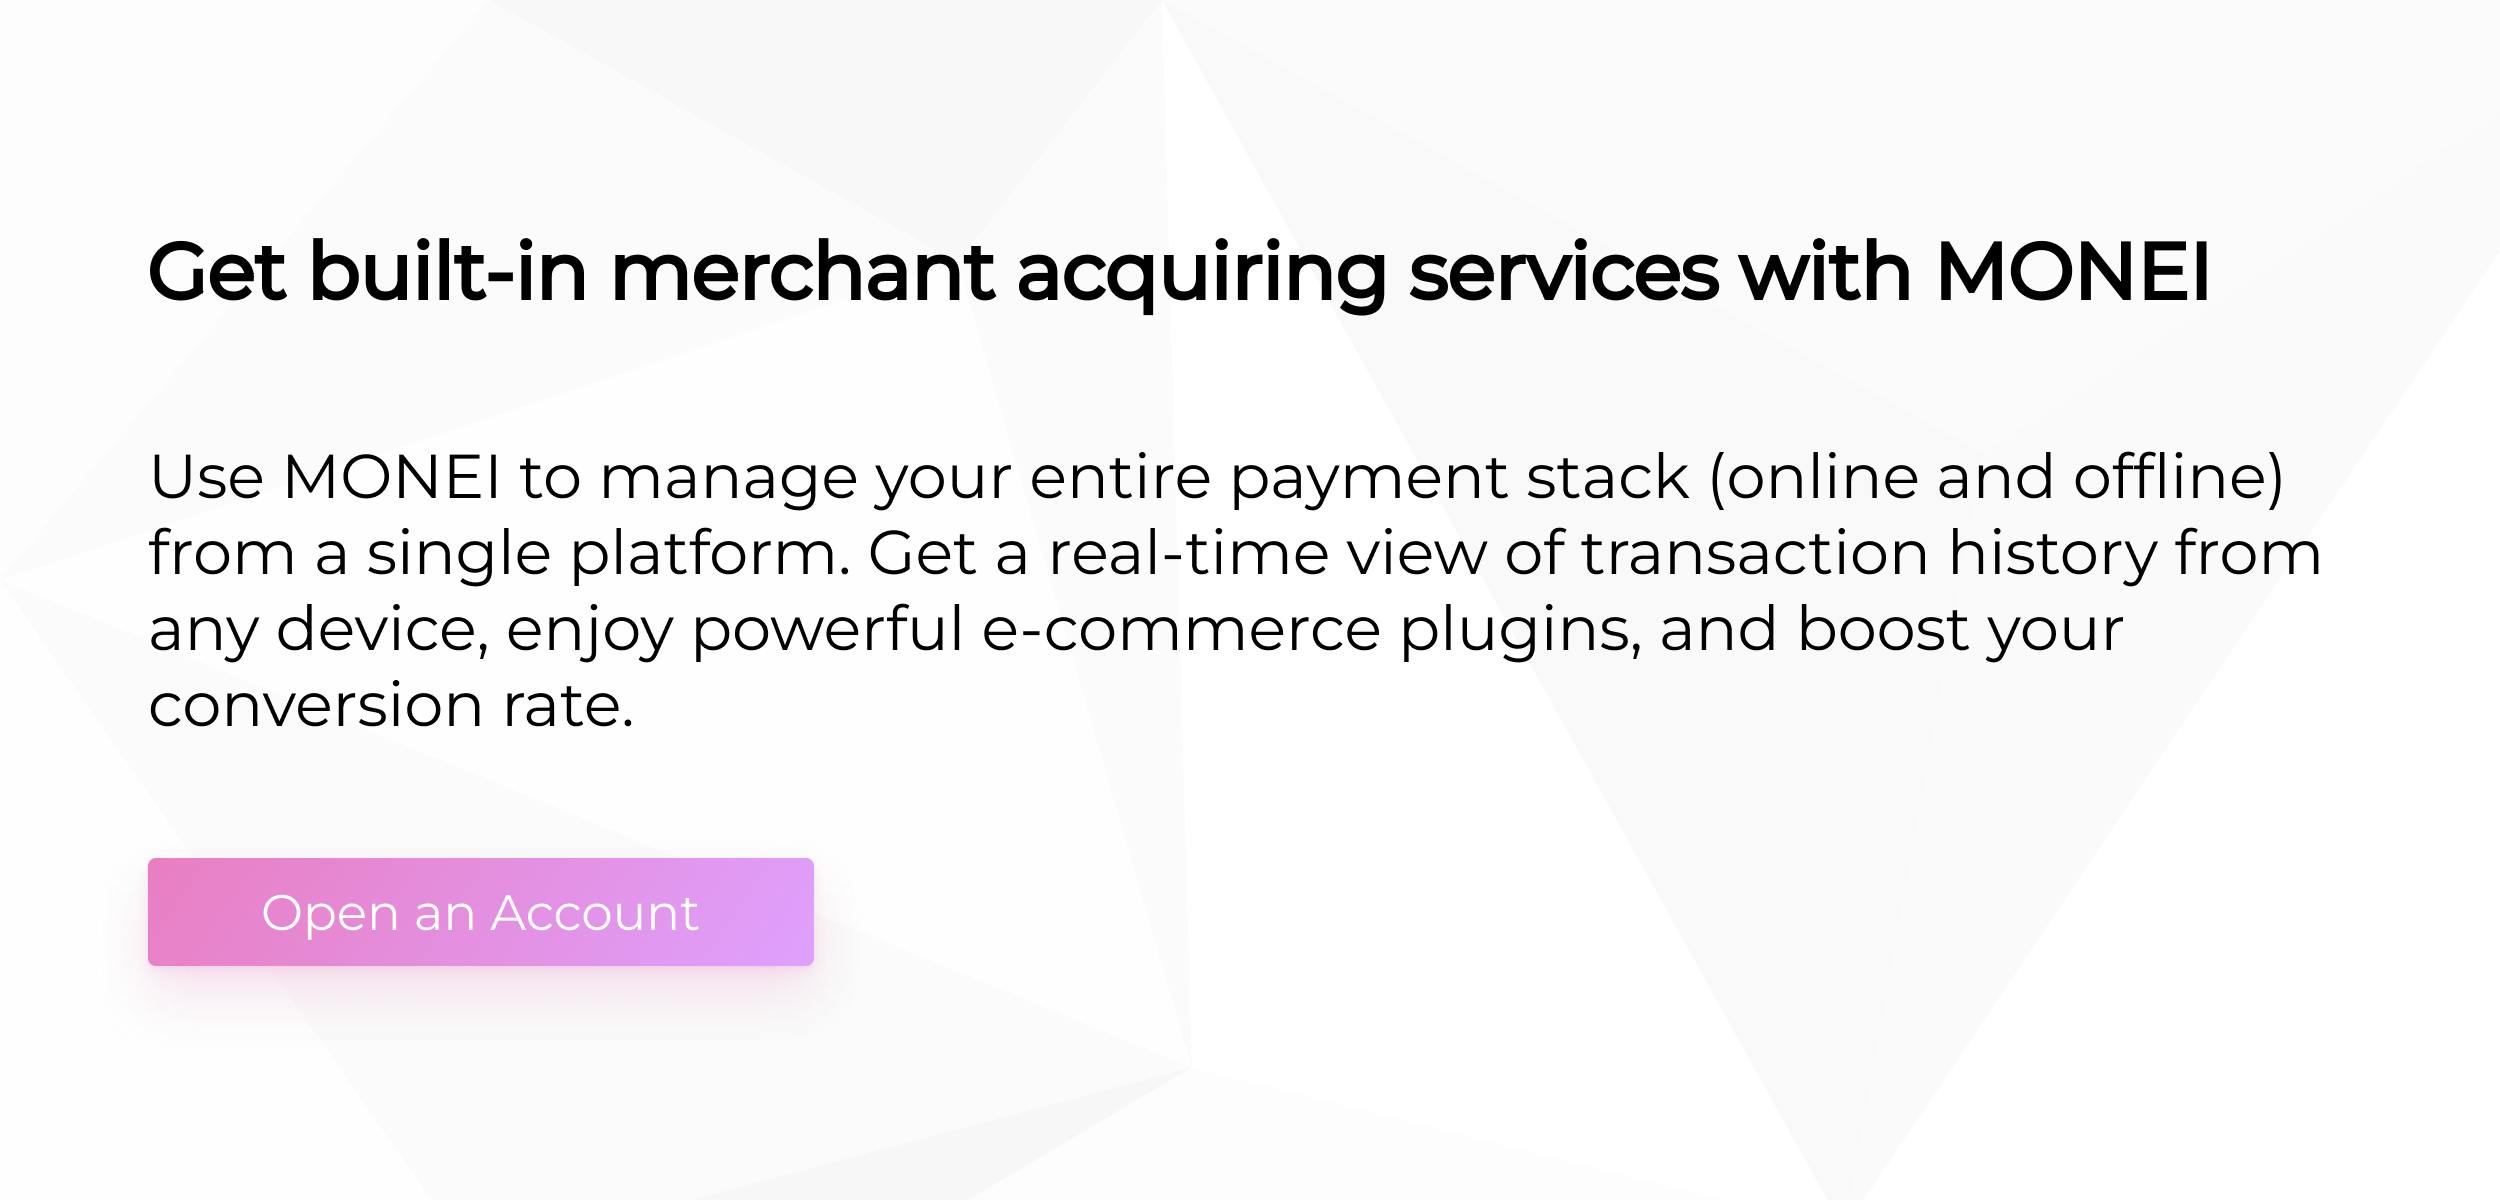 Merchant acquiring services call-to-action graphic 